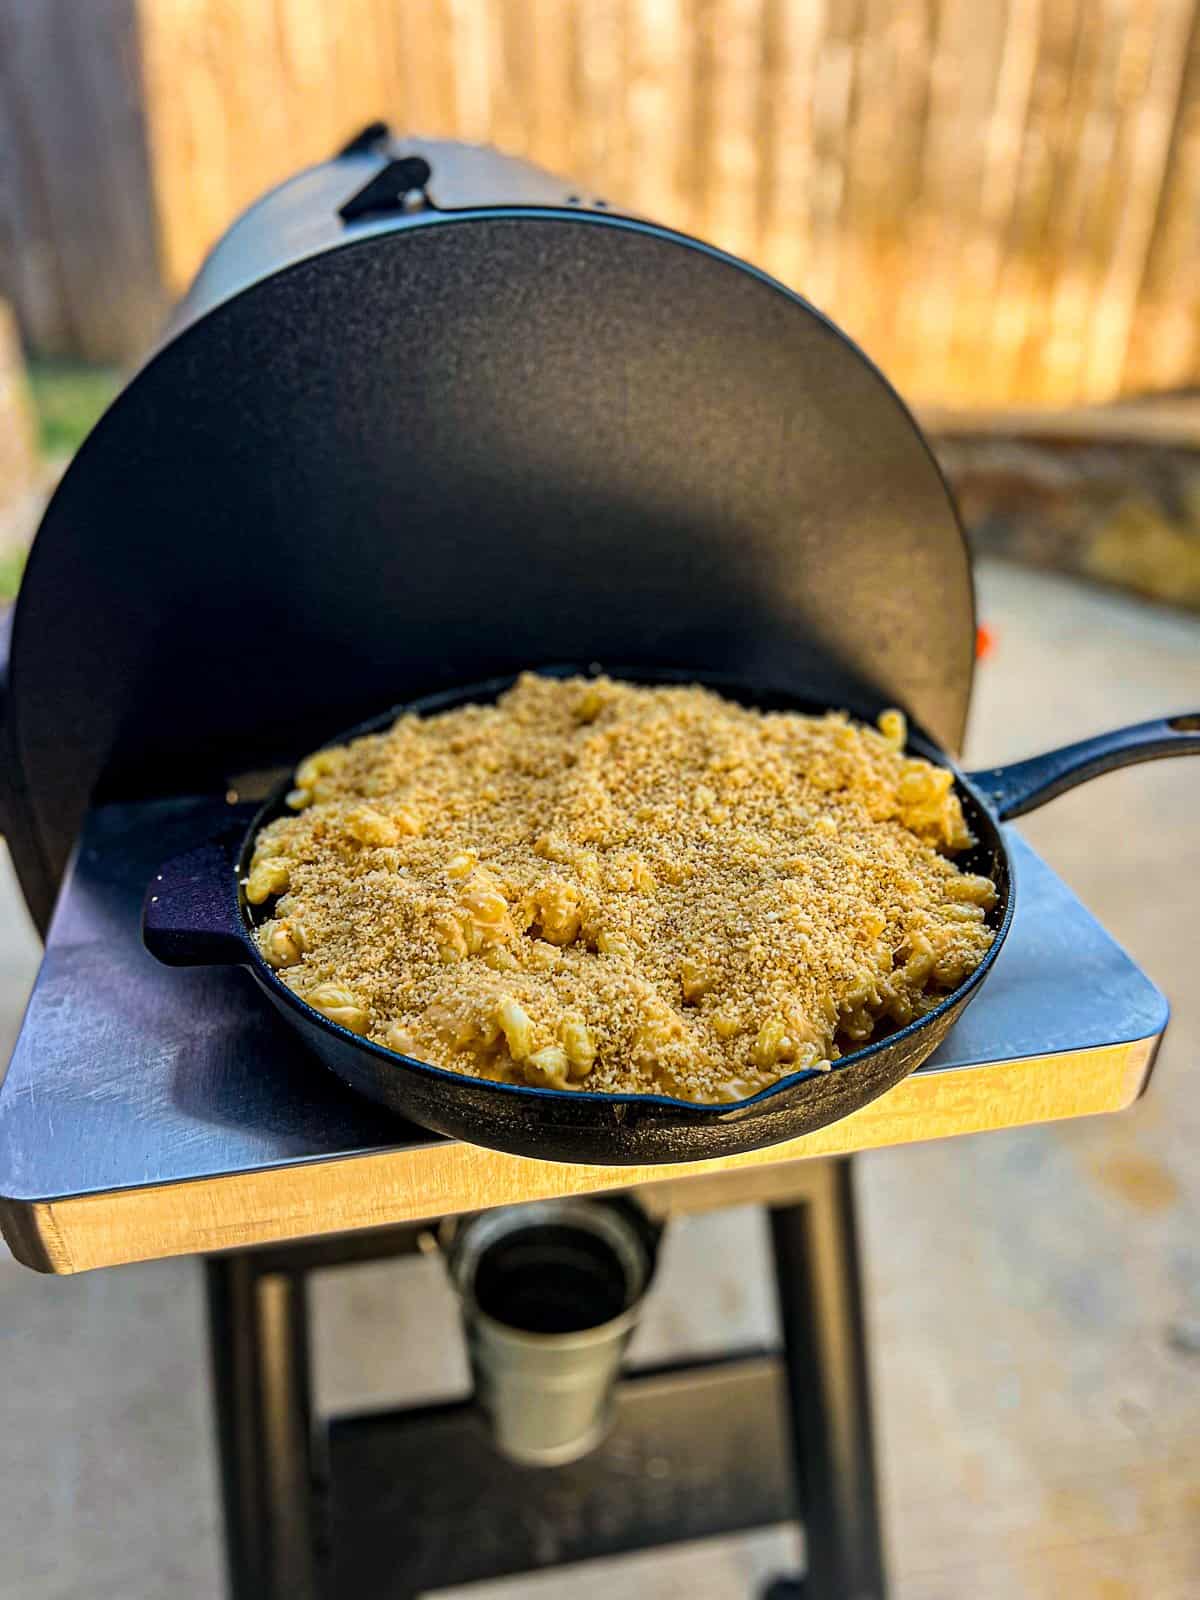 Traeger Grills with Smoked Mac And Cheese in a cast iron skillet to feed a crowd